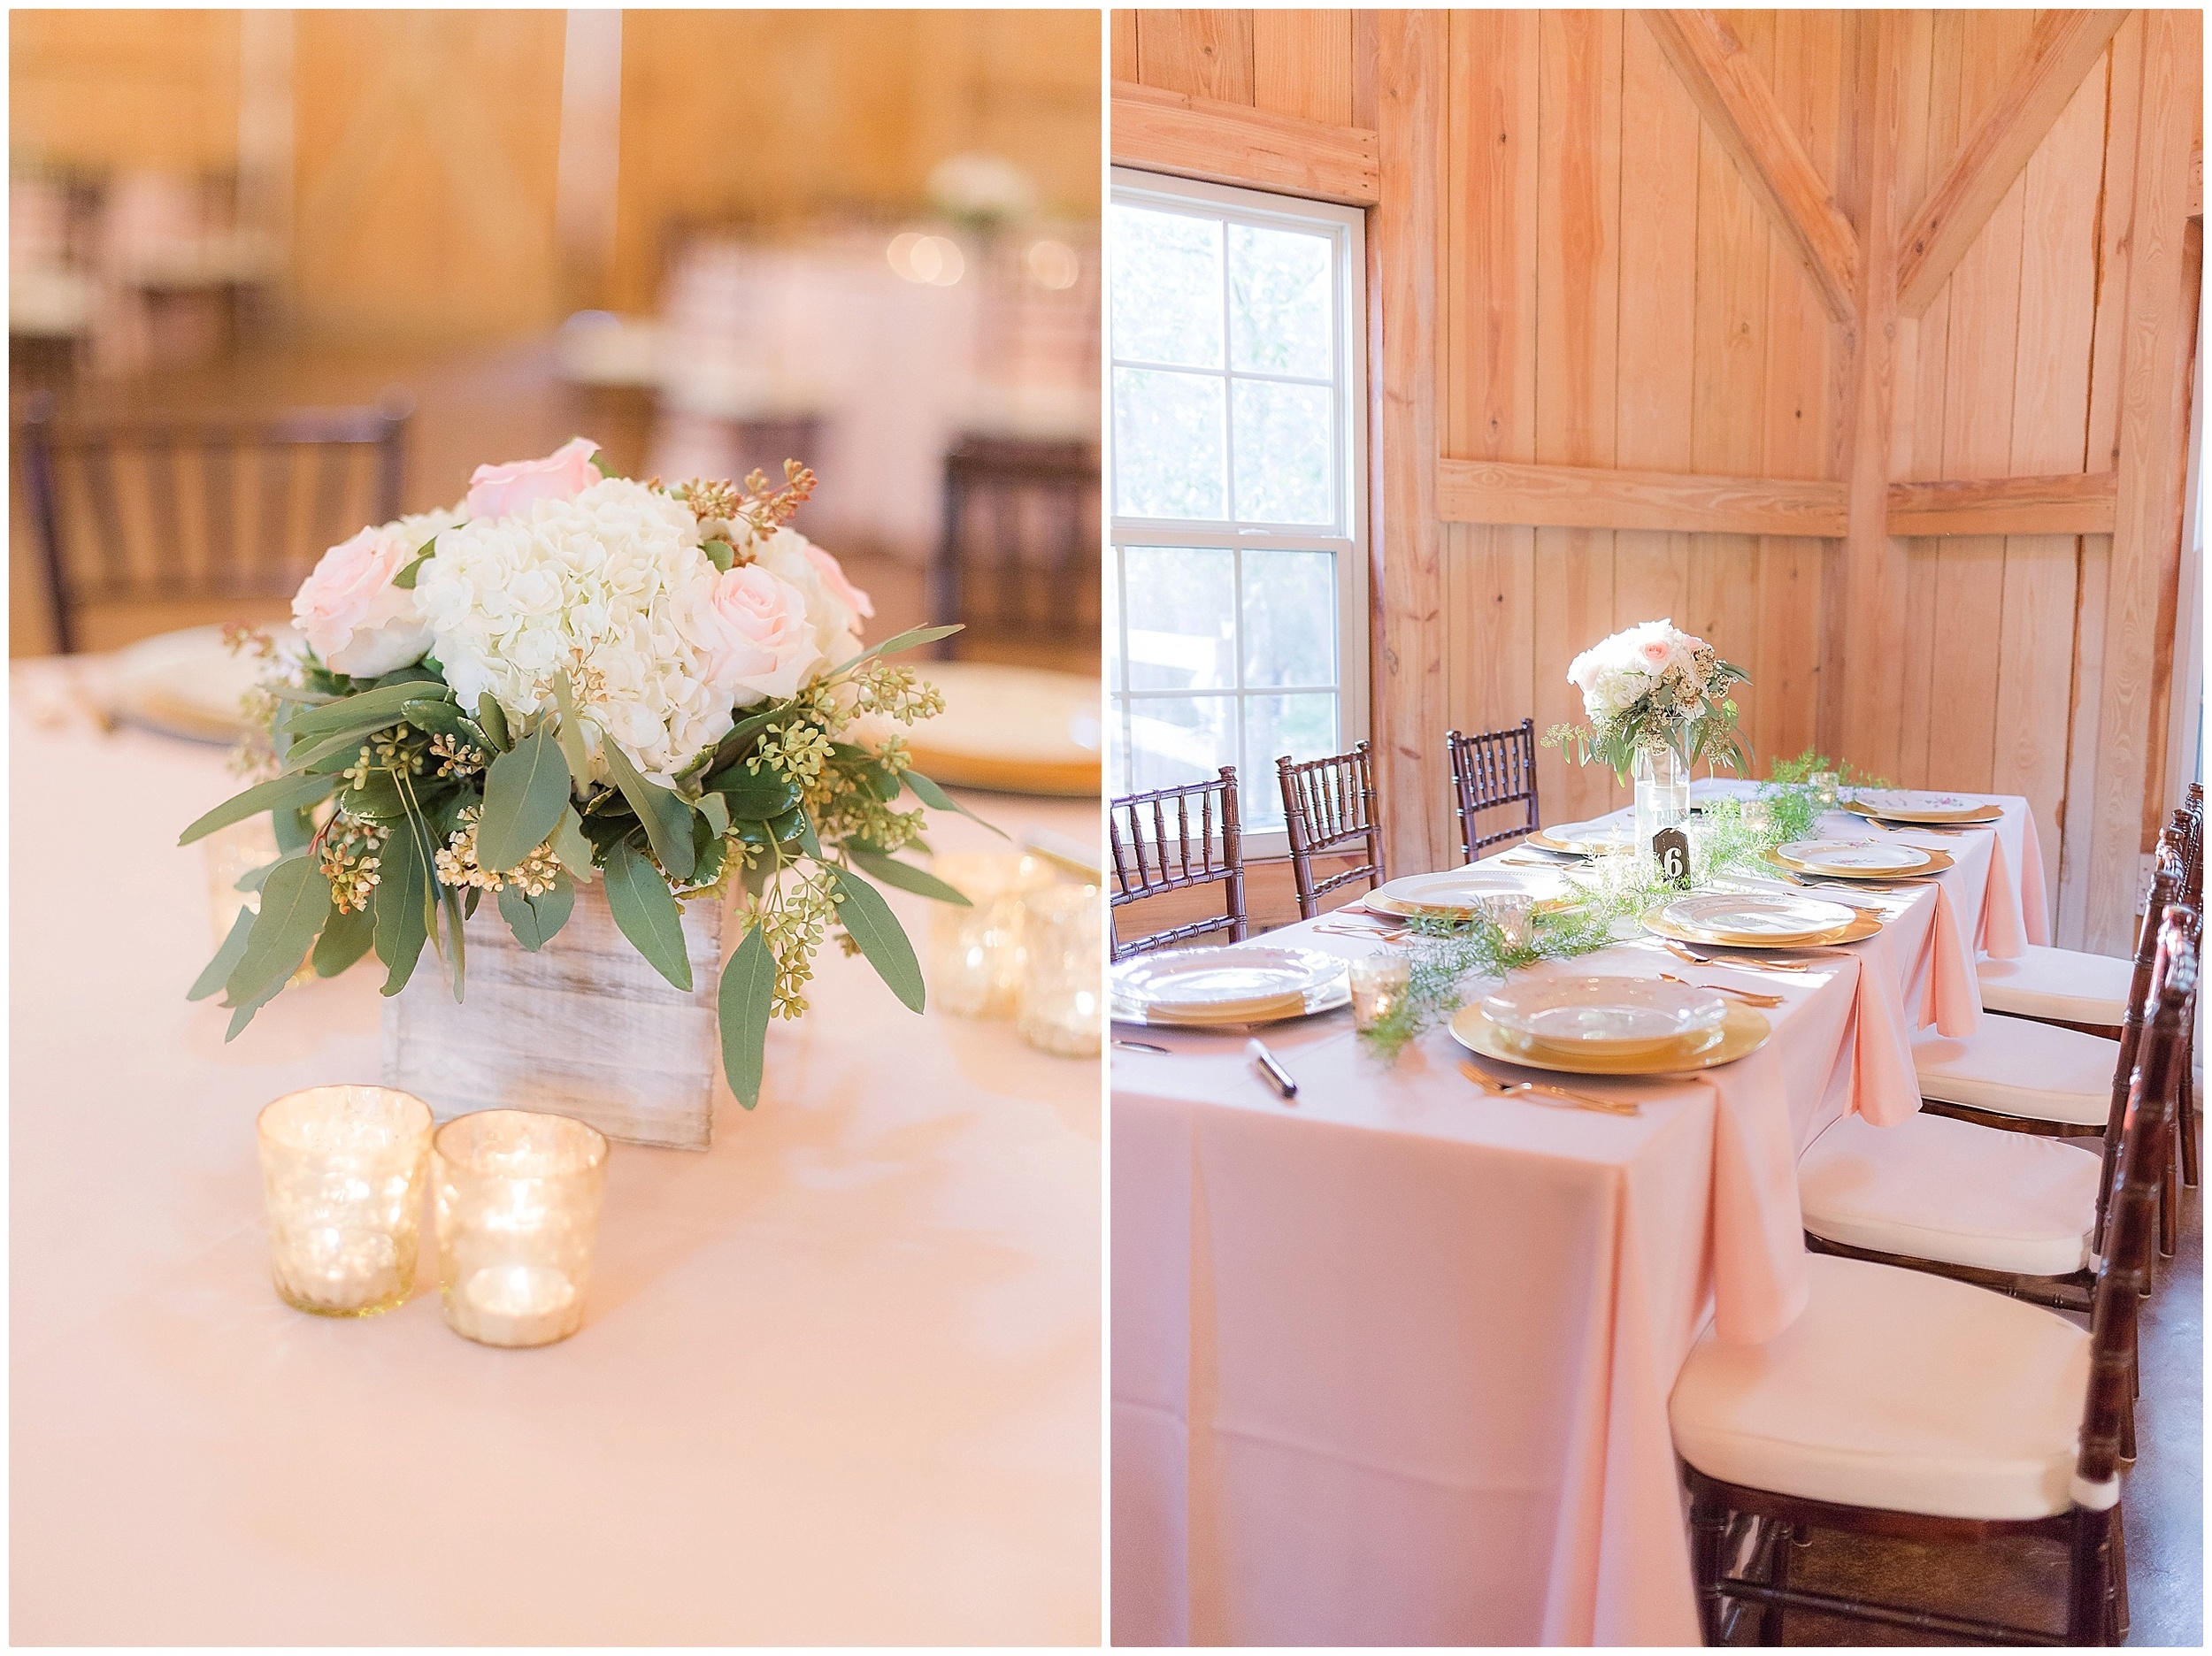 Rustic Barn Wedding with Blush Color Palette - Table Decor with flowers and candles 